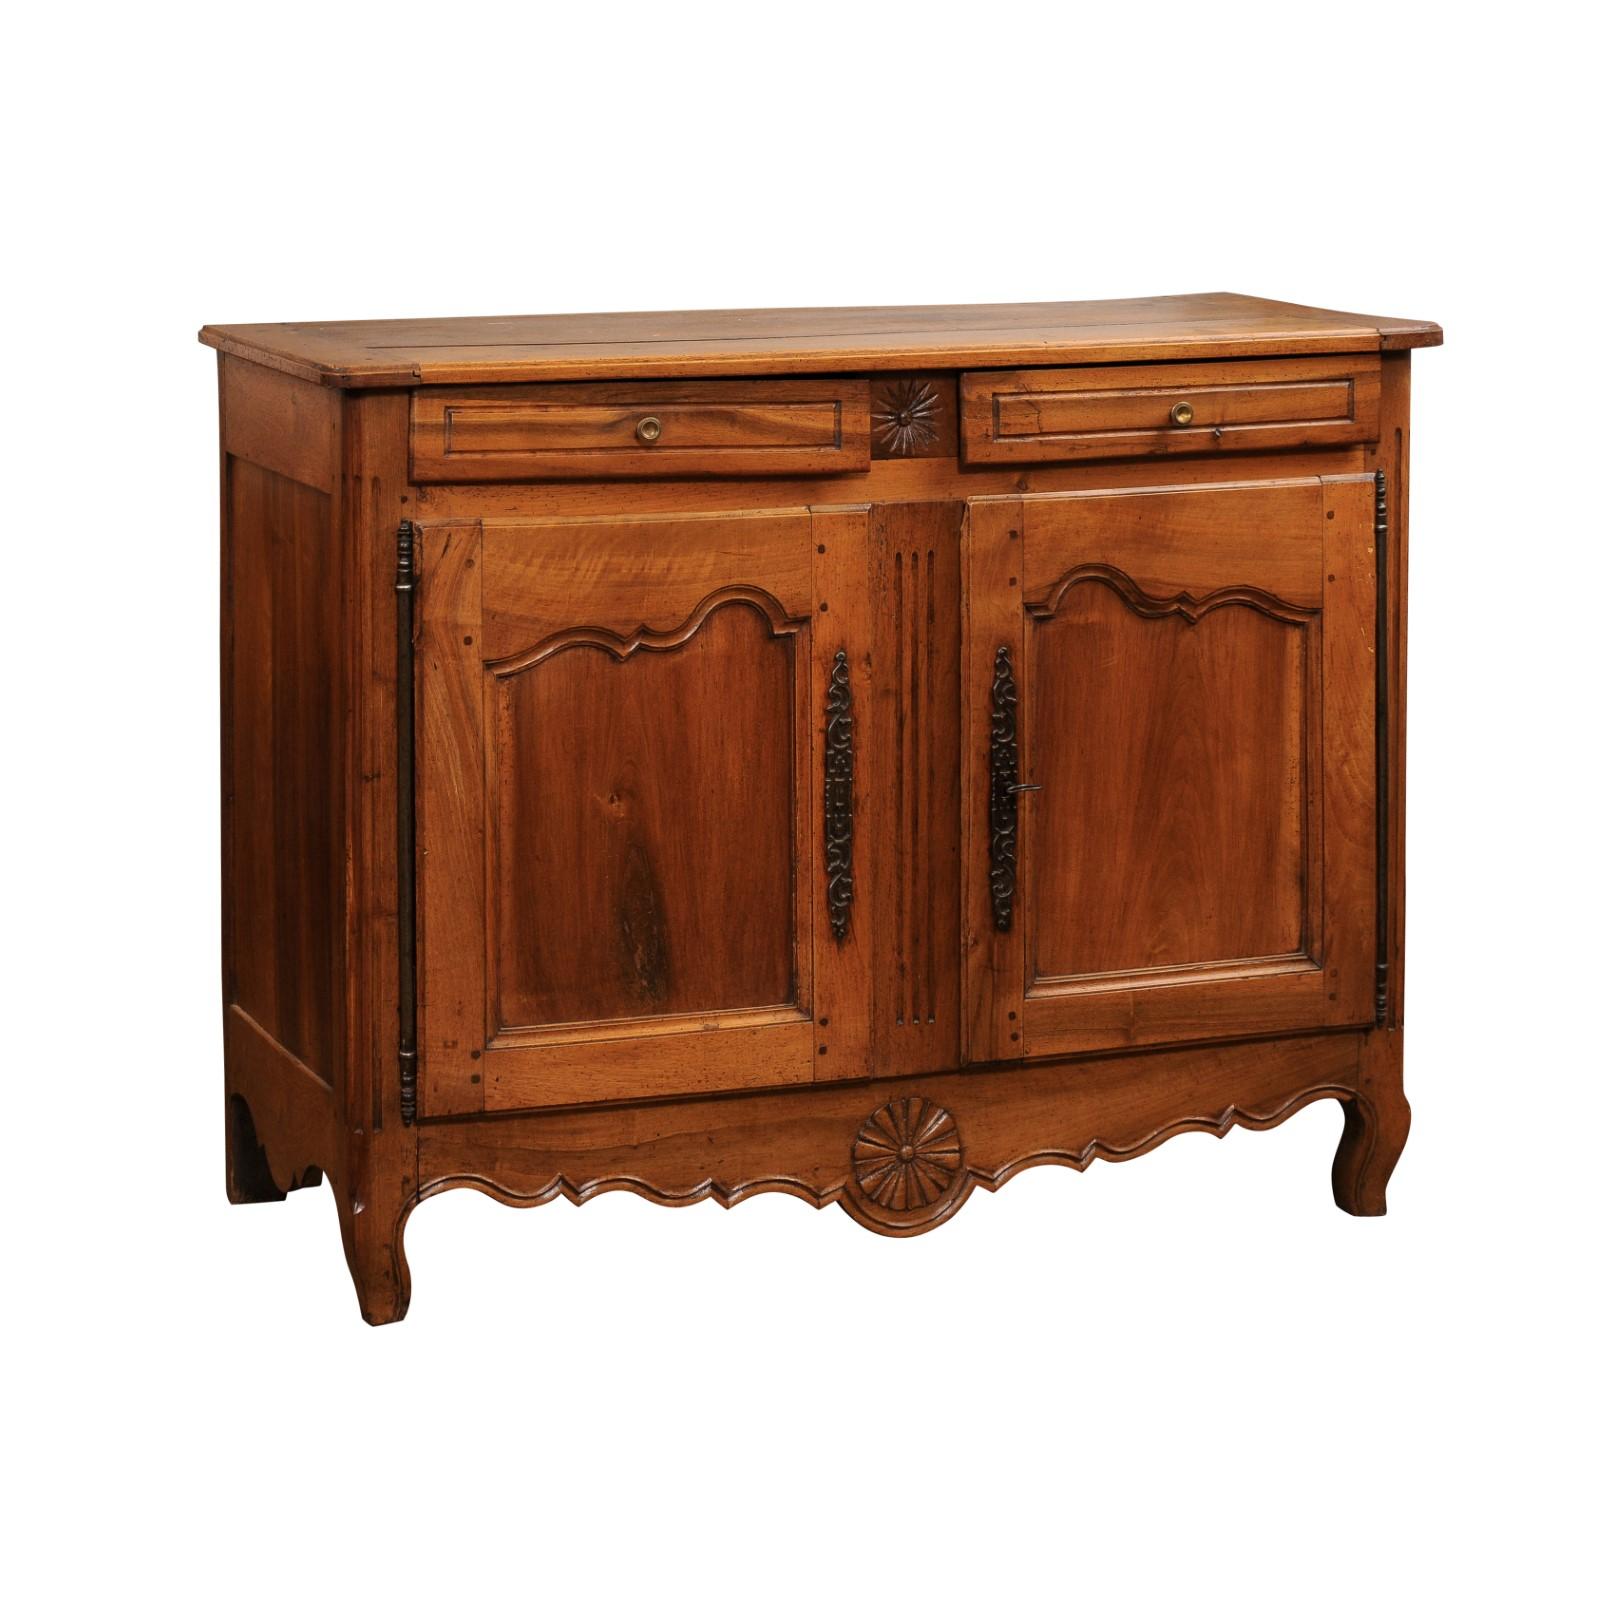 A French Transition style walnut buffet from the early 19th century, with two drawers over two doors, carved stars and scalloped apron. Created in France during the early years of the 19th century, this walnut buffet belongs to the 